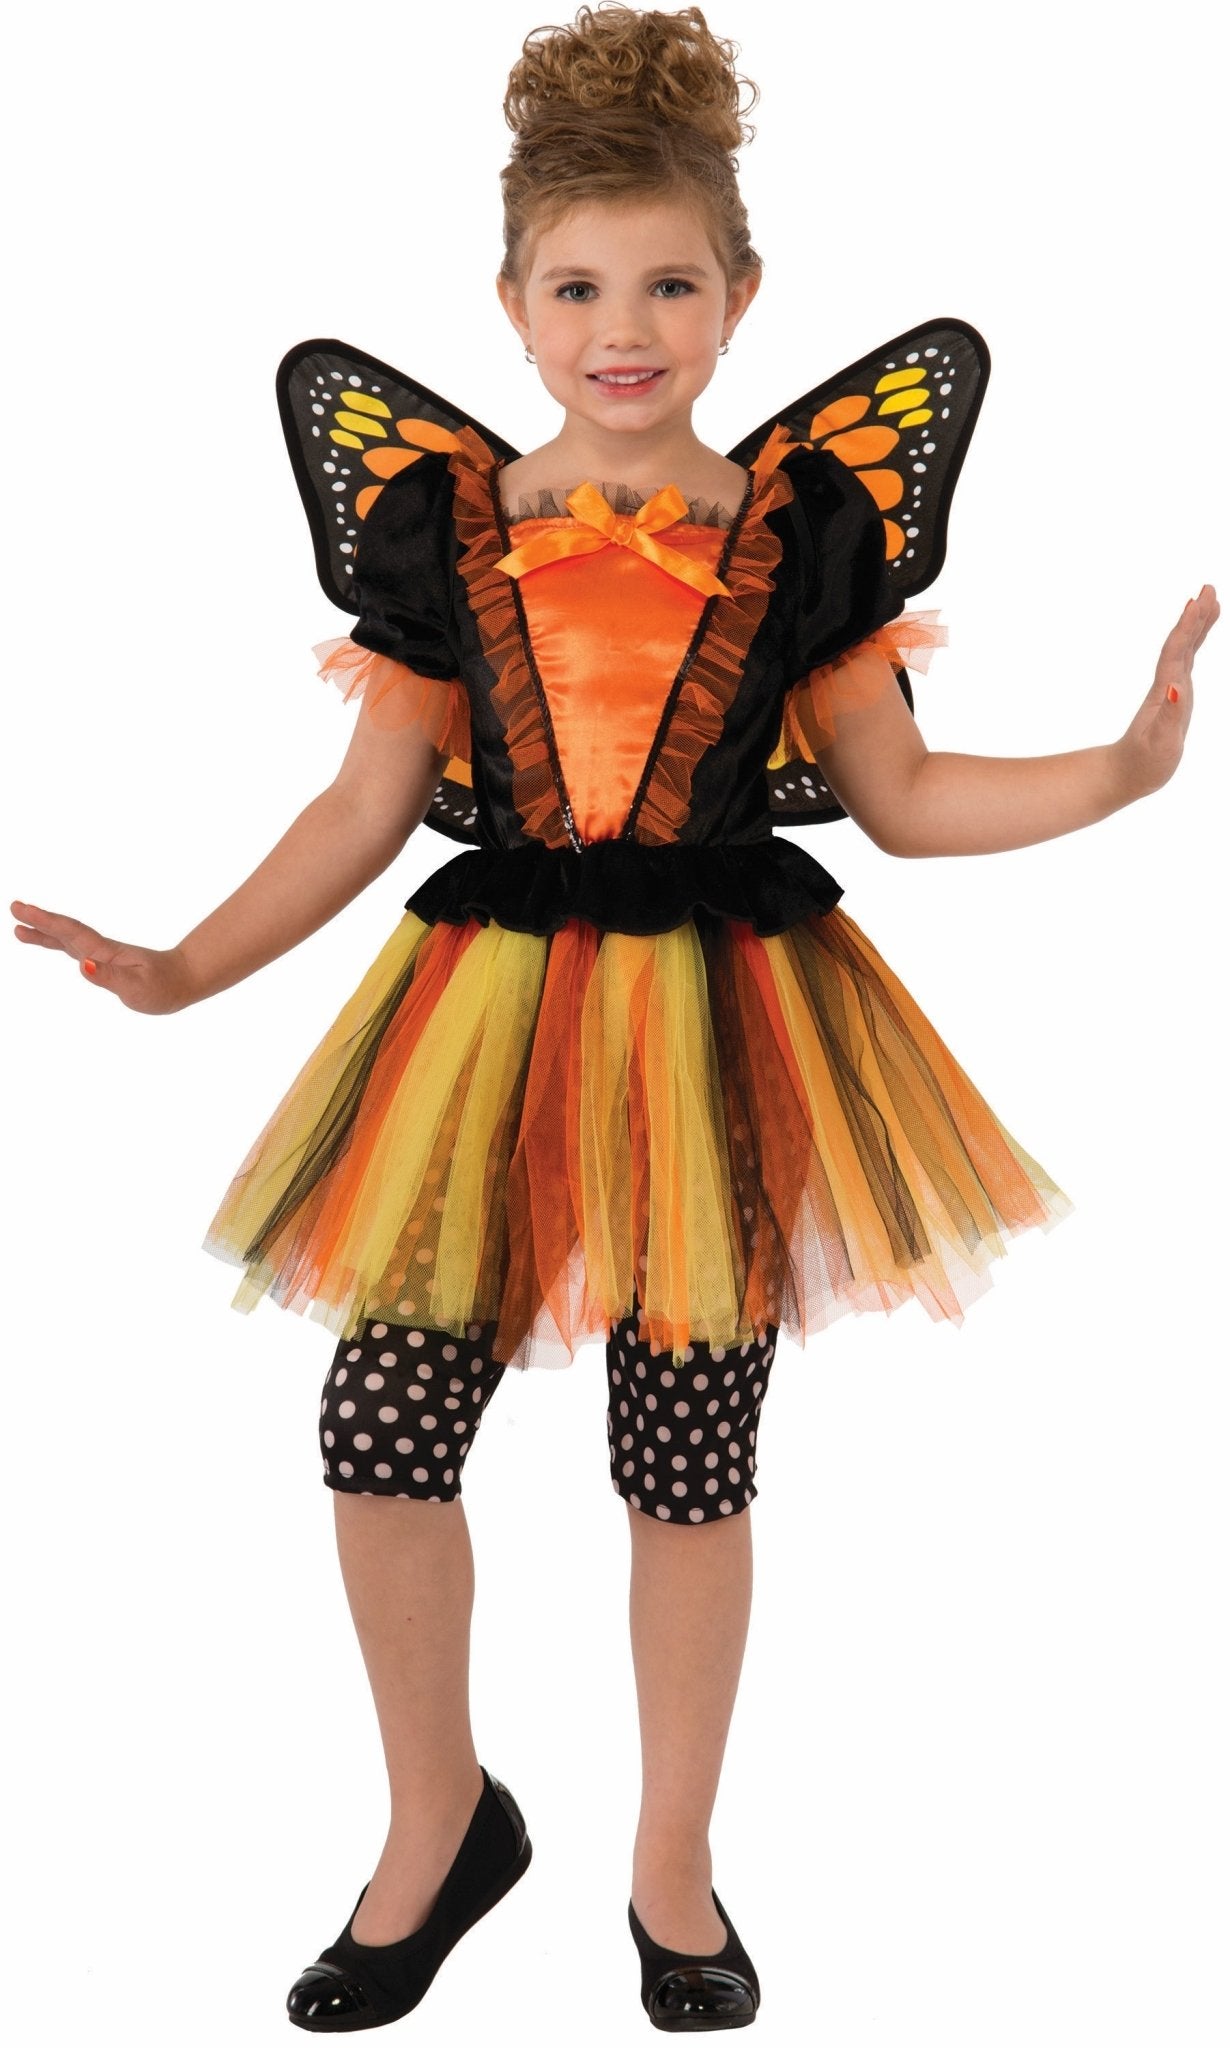 Toddler Girls Monarch Butterfly Costume - Medium - JJ's Party House